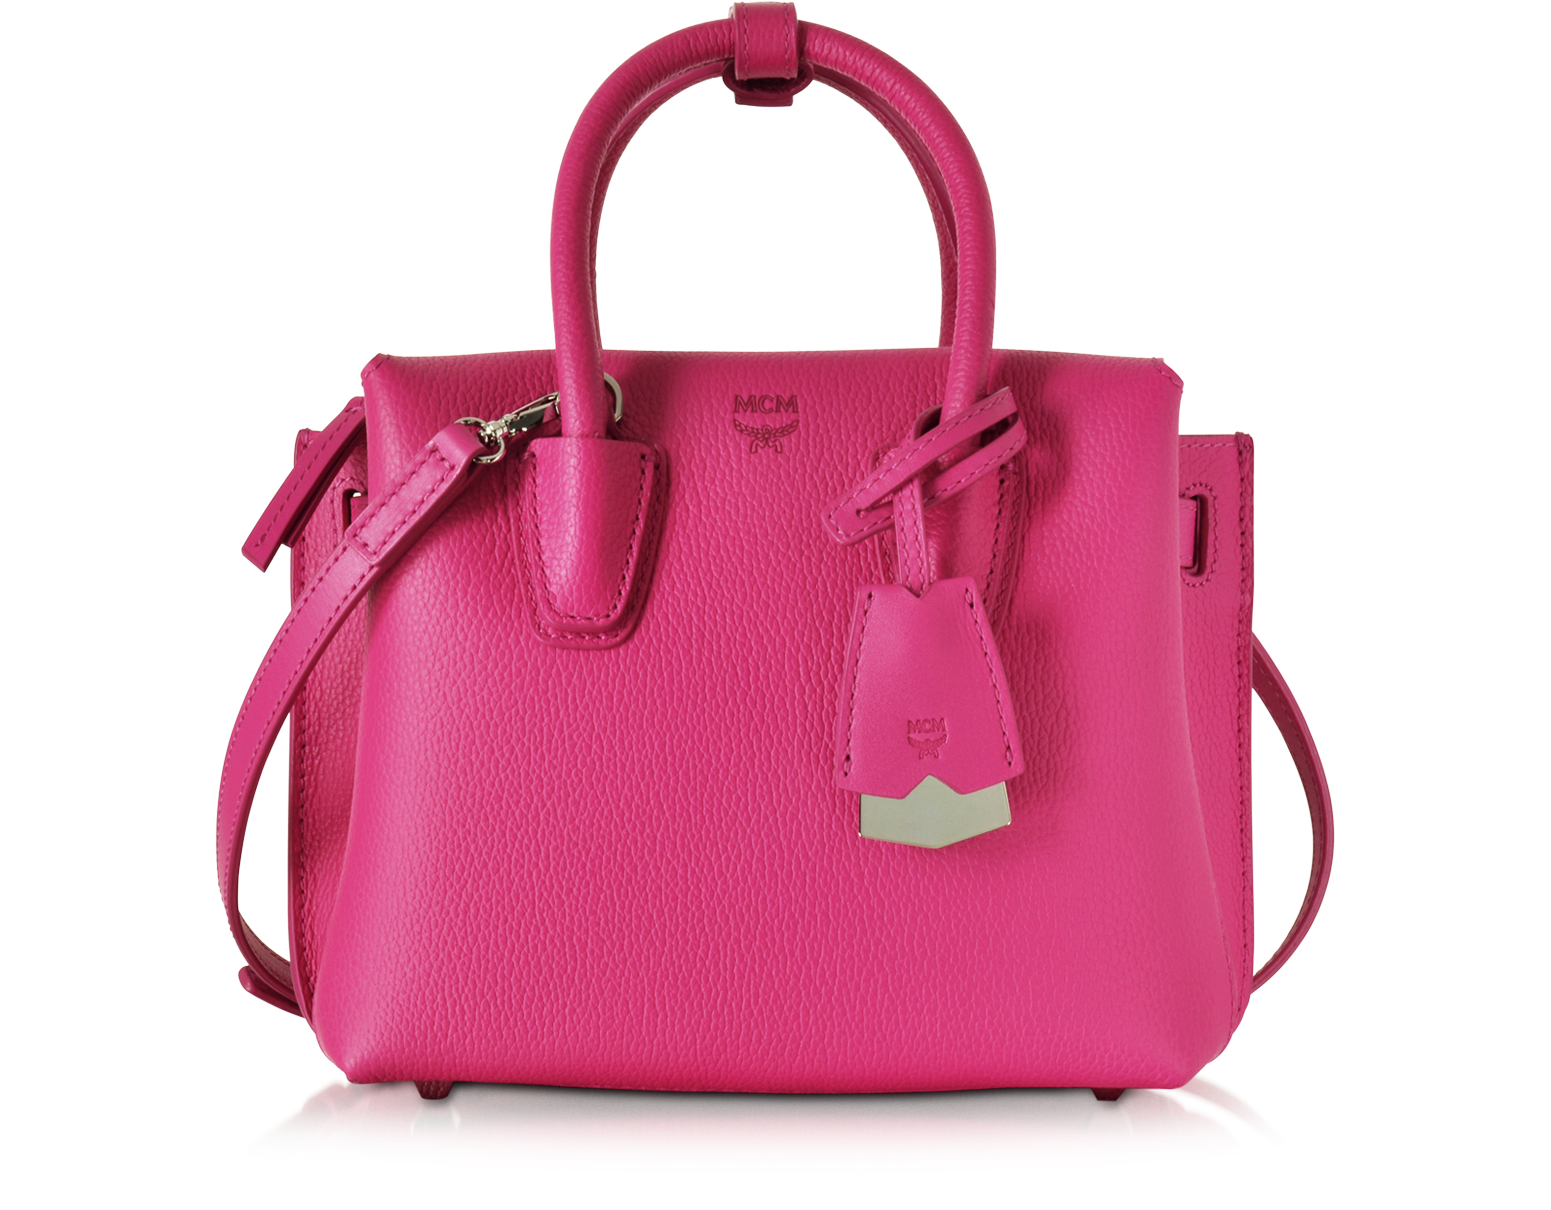 MCM Milla Beetroot Pink Leather Mini Tote at FORZIERI